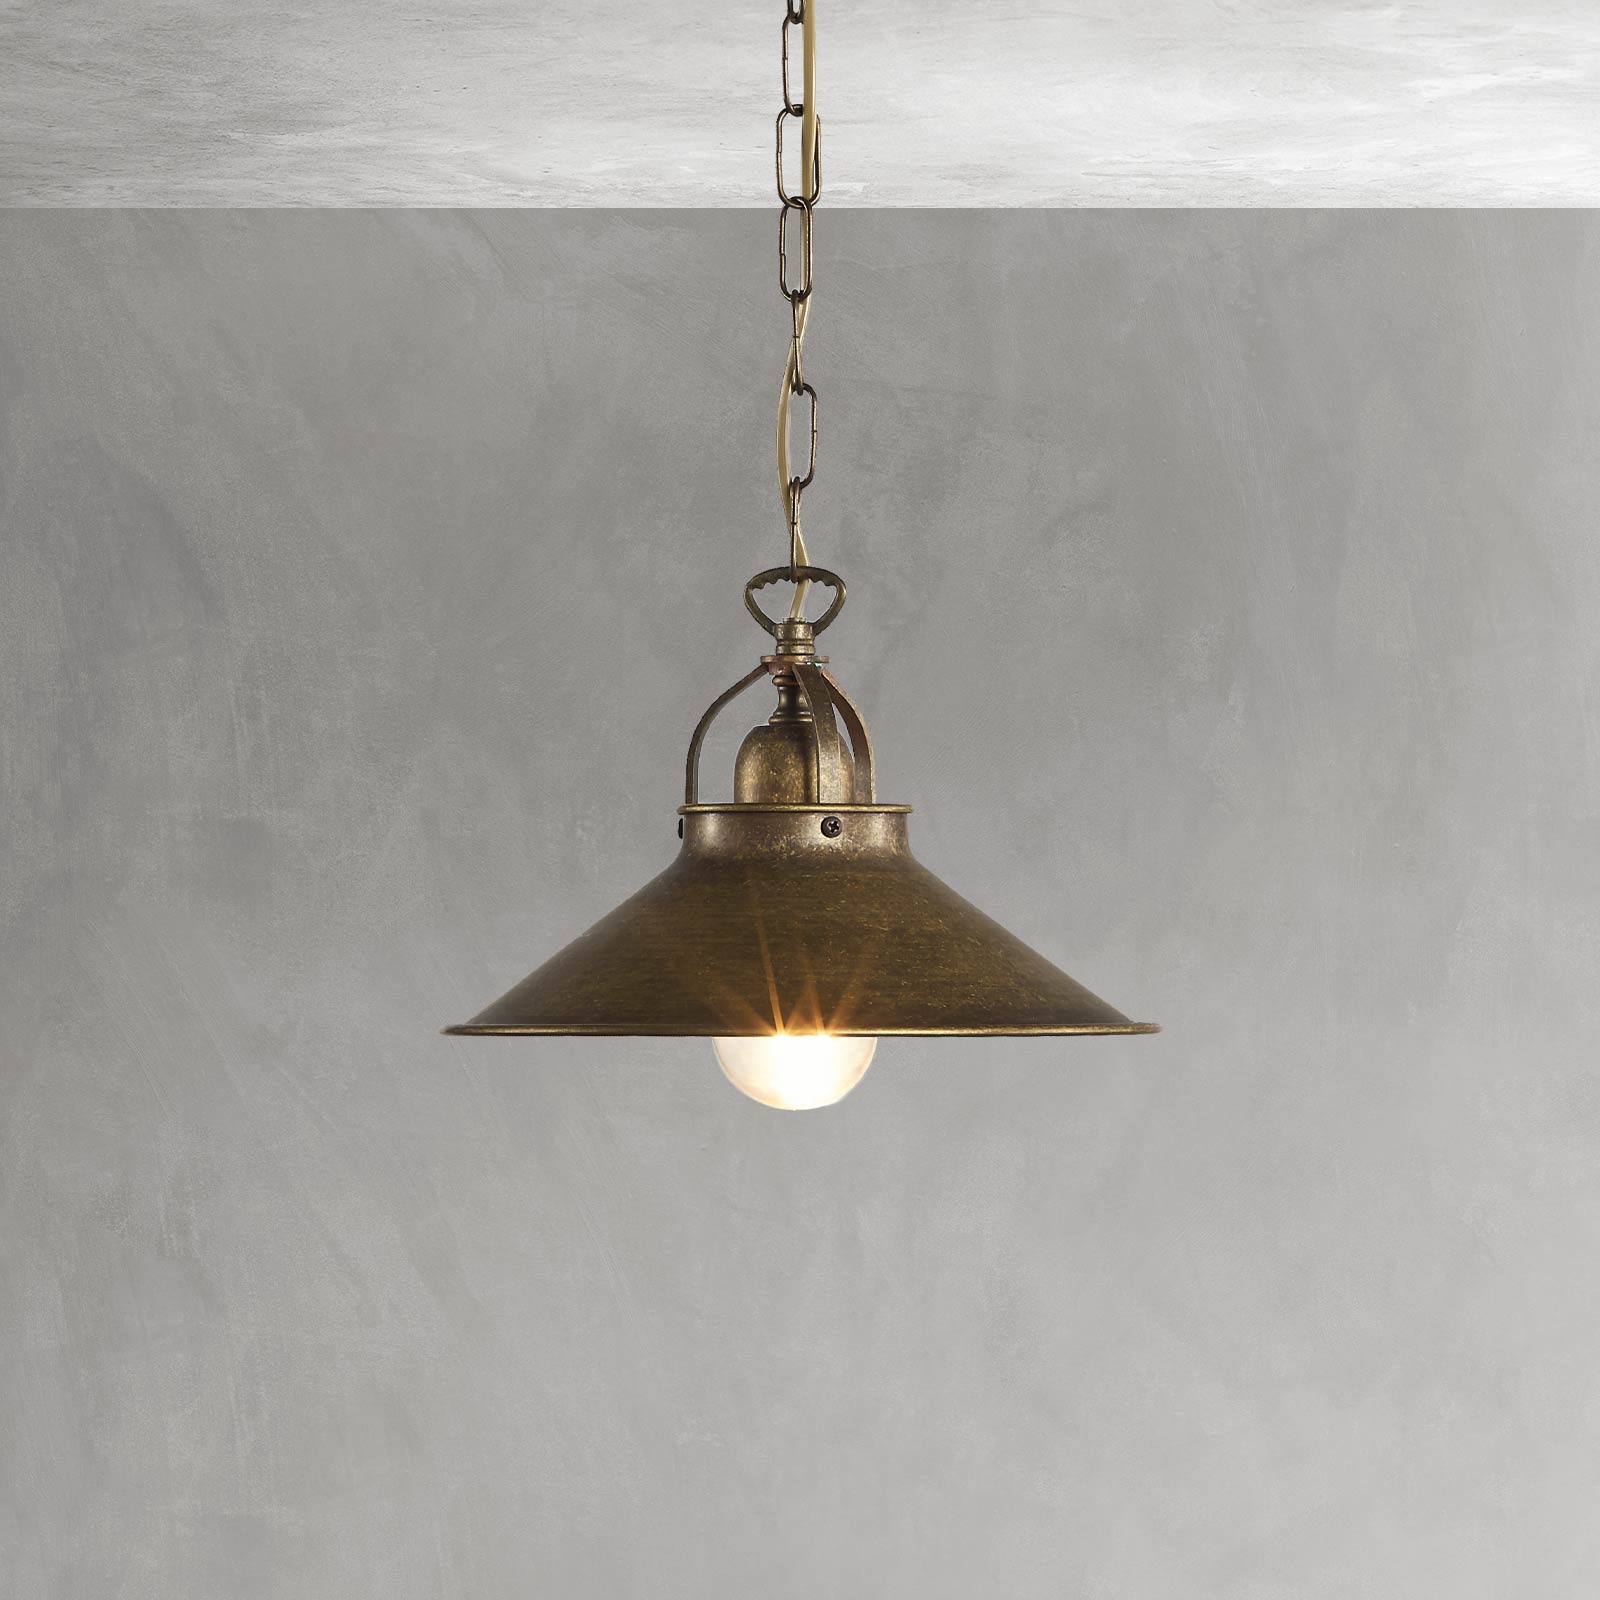 t4option0_0 | Industrial Hanging Light For Pubs 25 Cm Alice Ghidini 1849